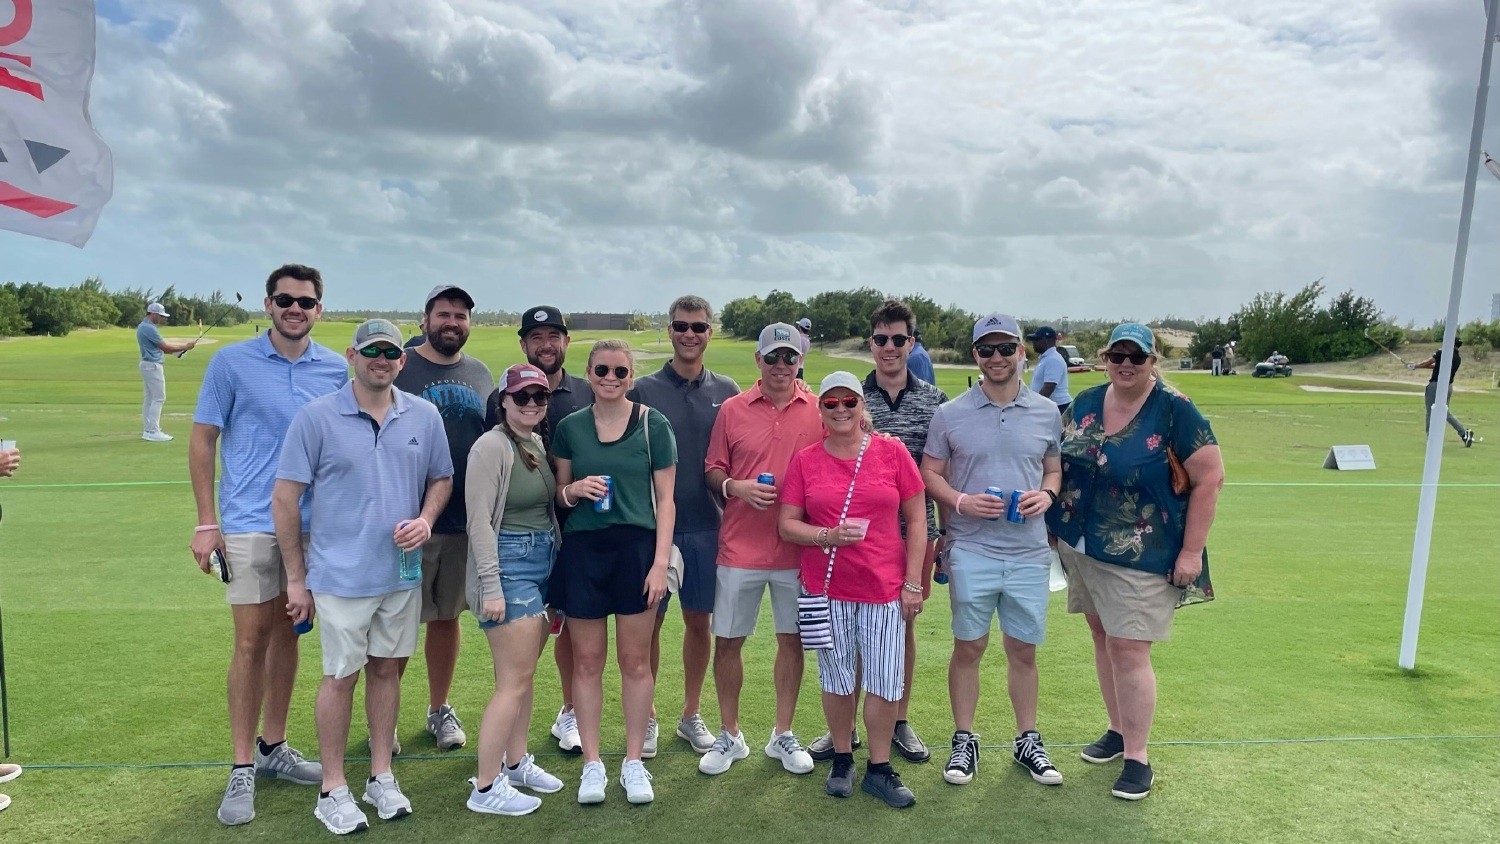 A teambuilding outing we had at the company conference in the Bahamas